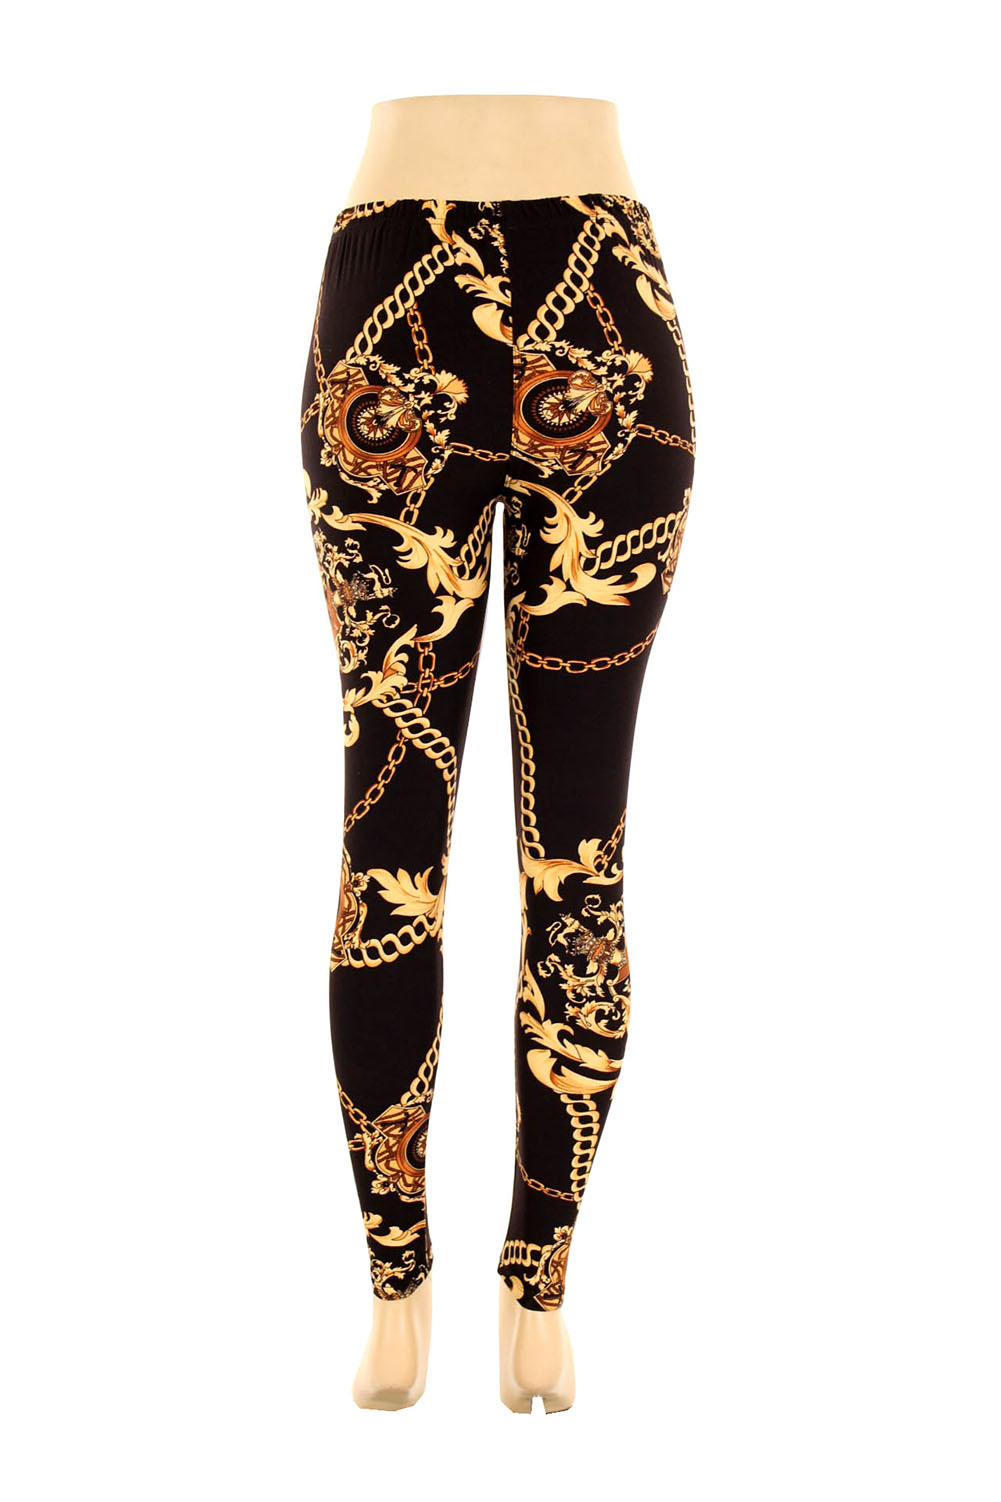 Plus Size Printed Leggings Graphic Color Stretchy Pants One Size Fits ...